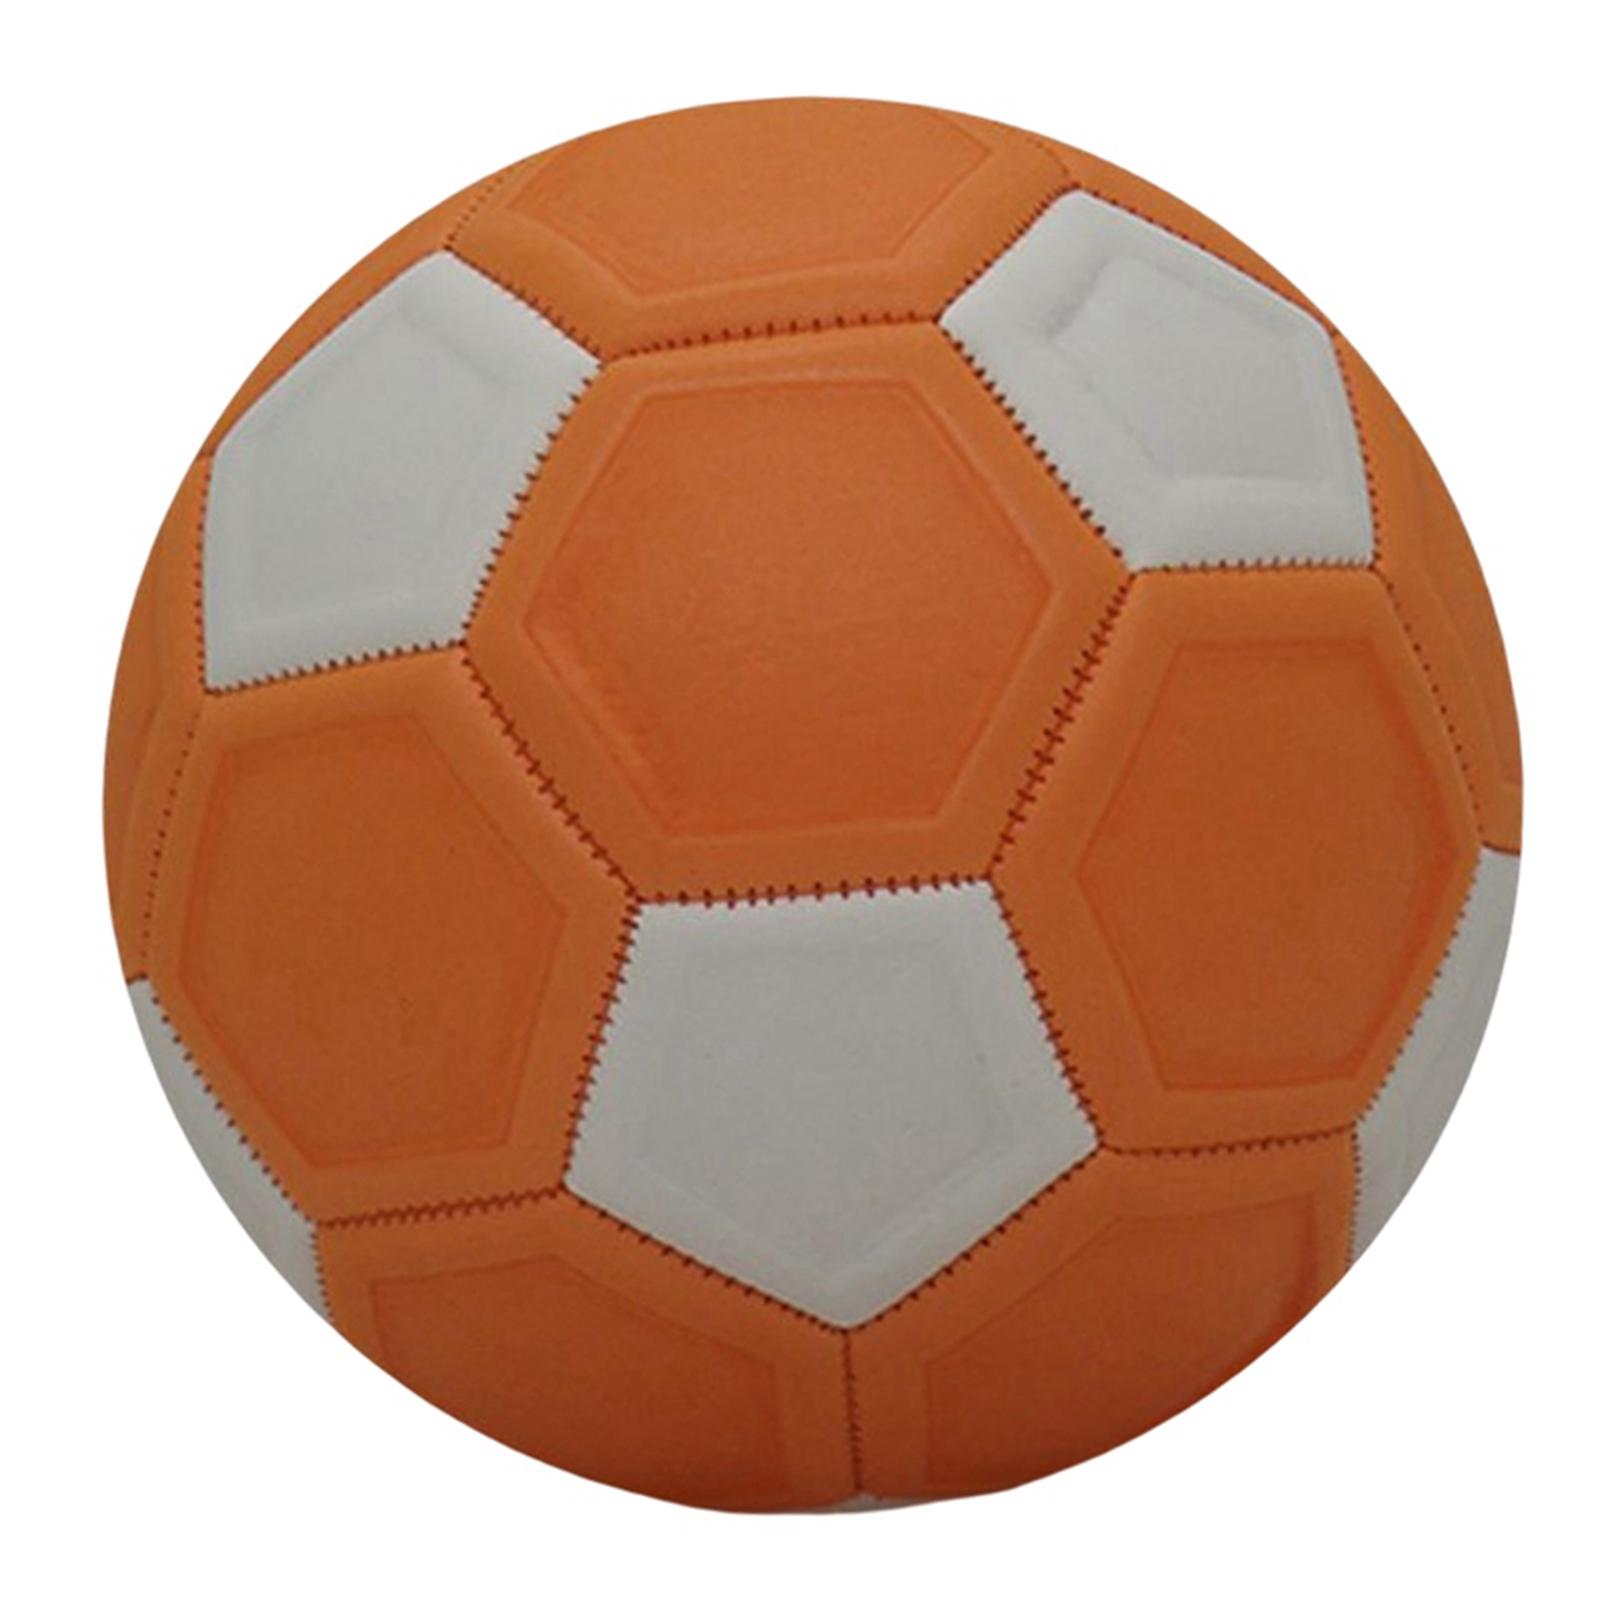 Soccer Ball Size 4 Games Birthday Gift Official Match Ball for Girls Boys